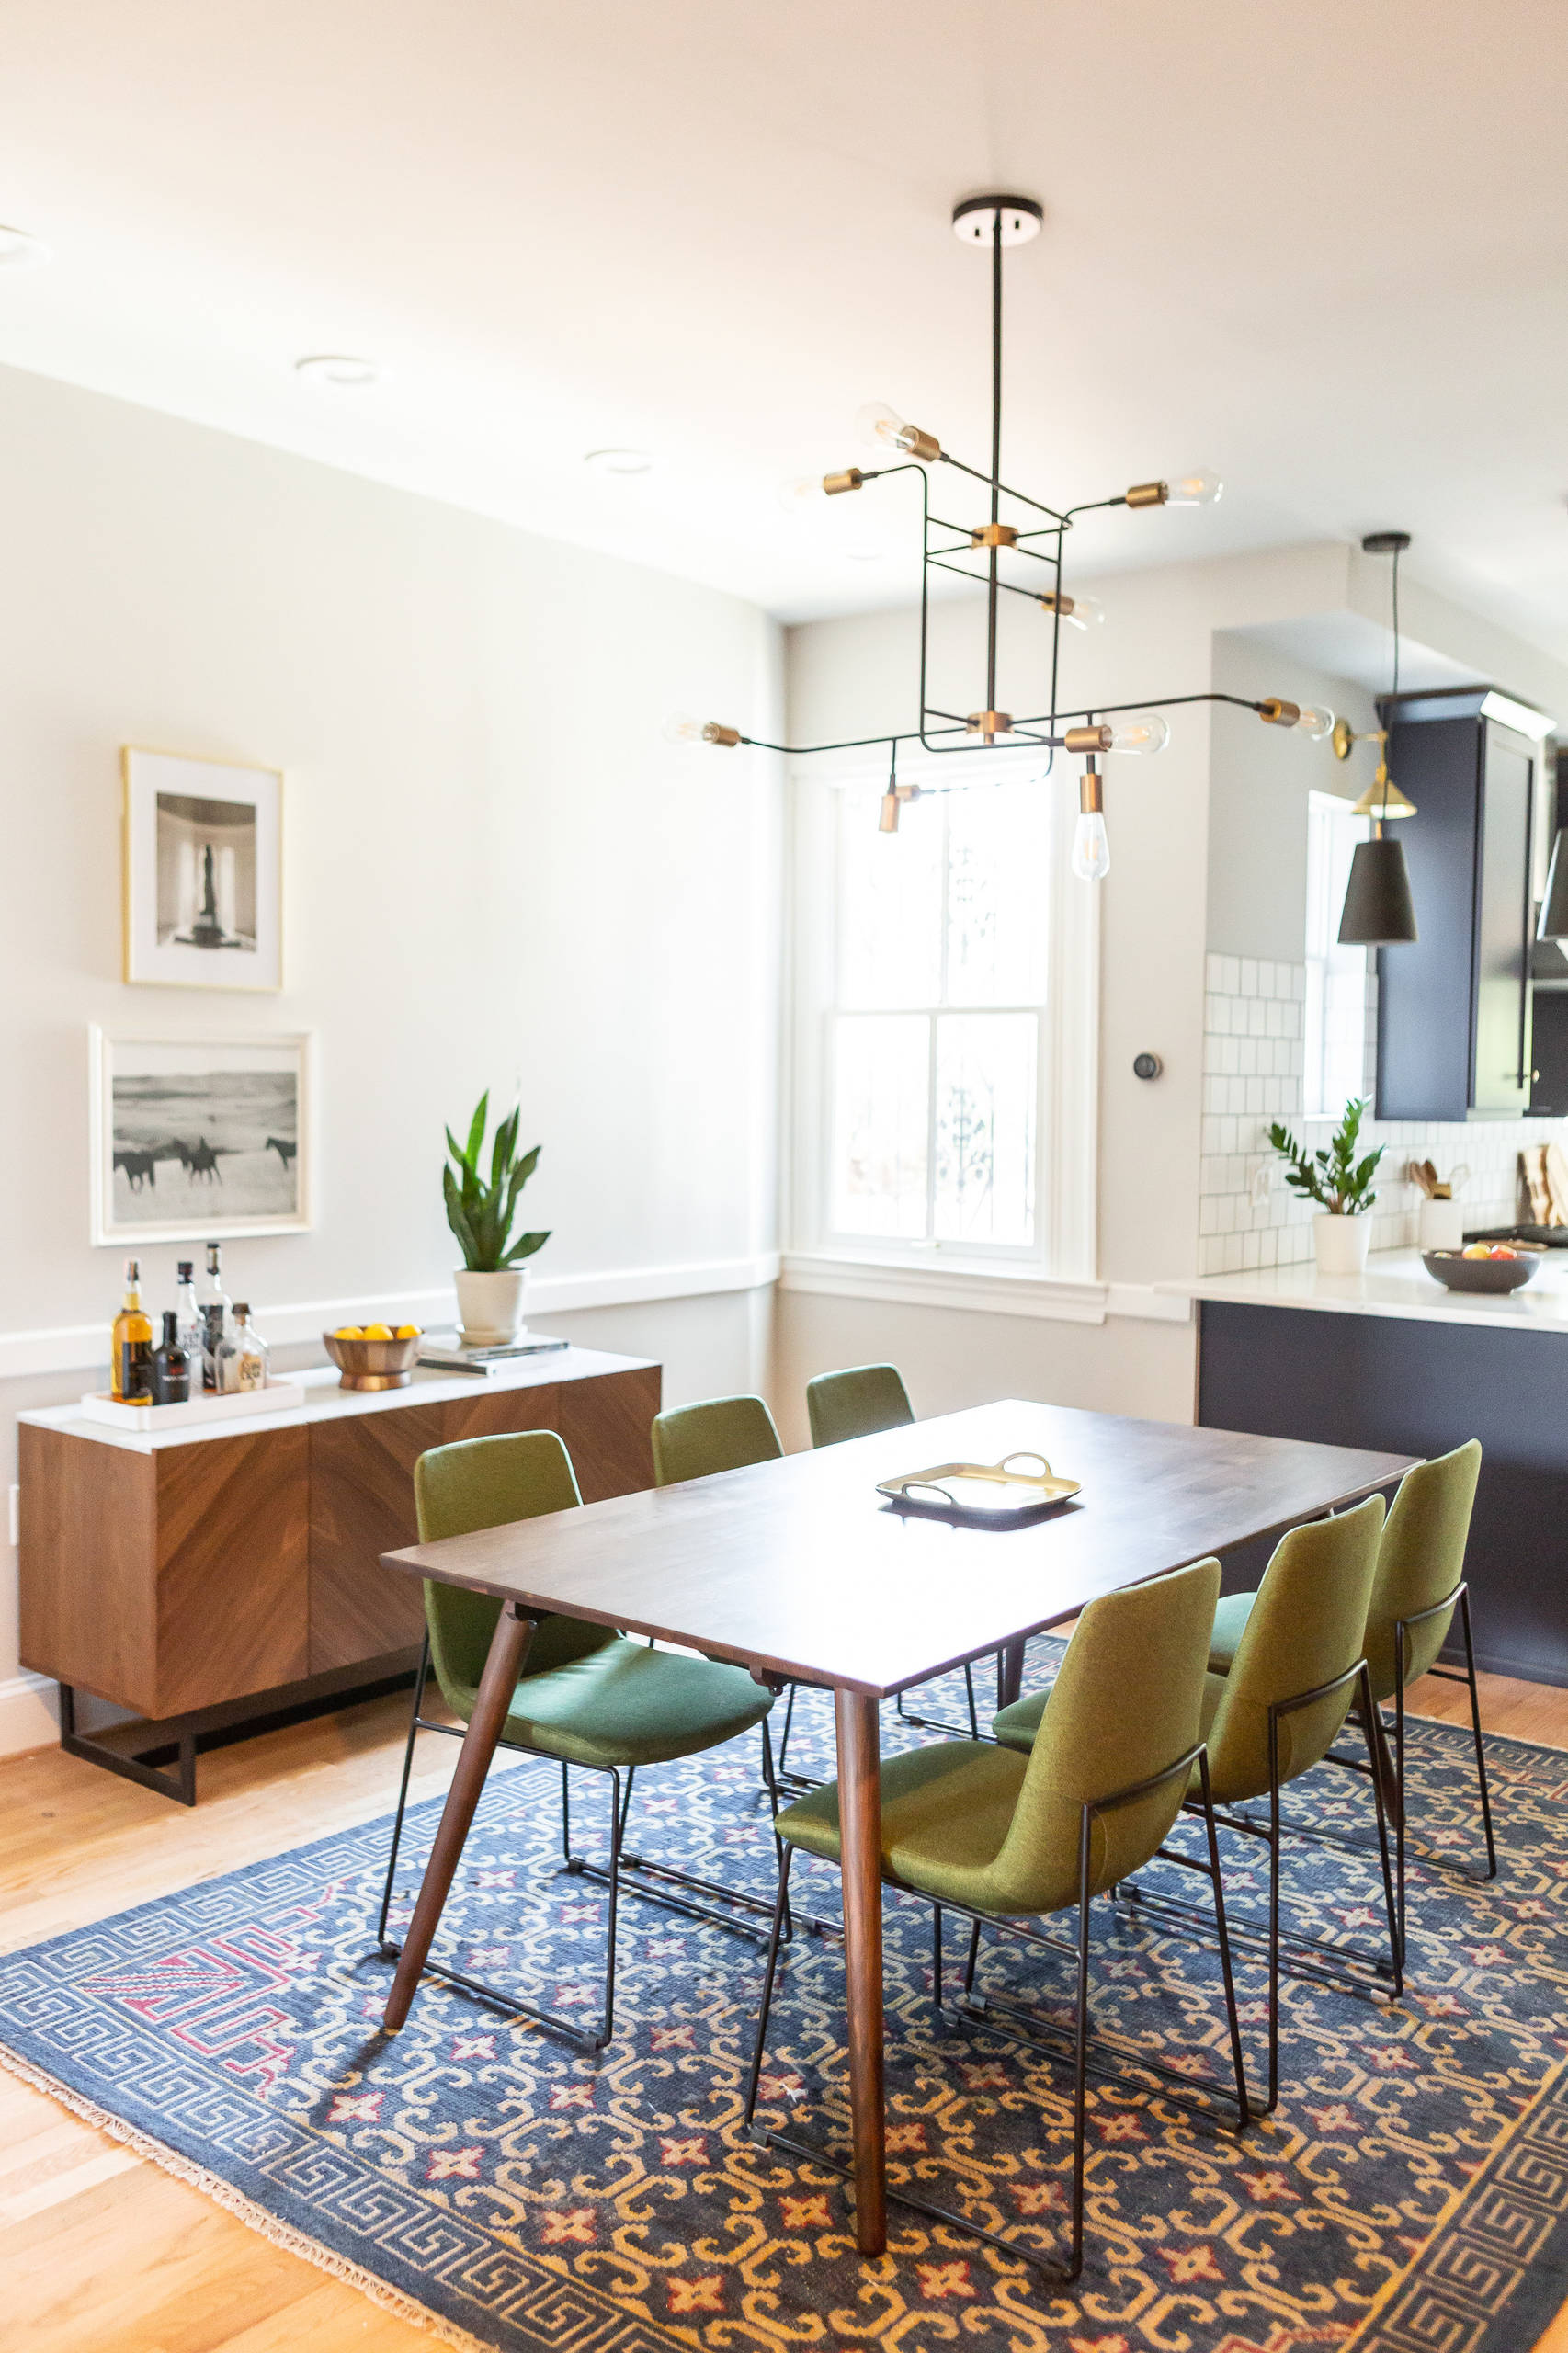 75 Beautiful Mid Century Modern Dining Room Pictures Ideas December 2020 Houzz